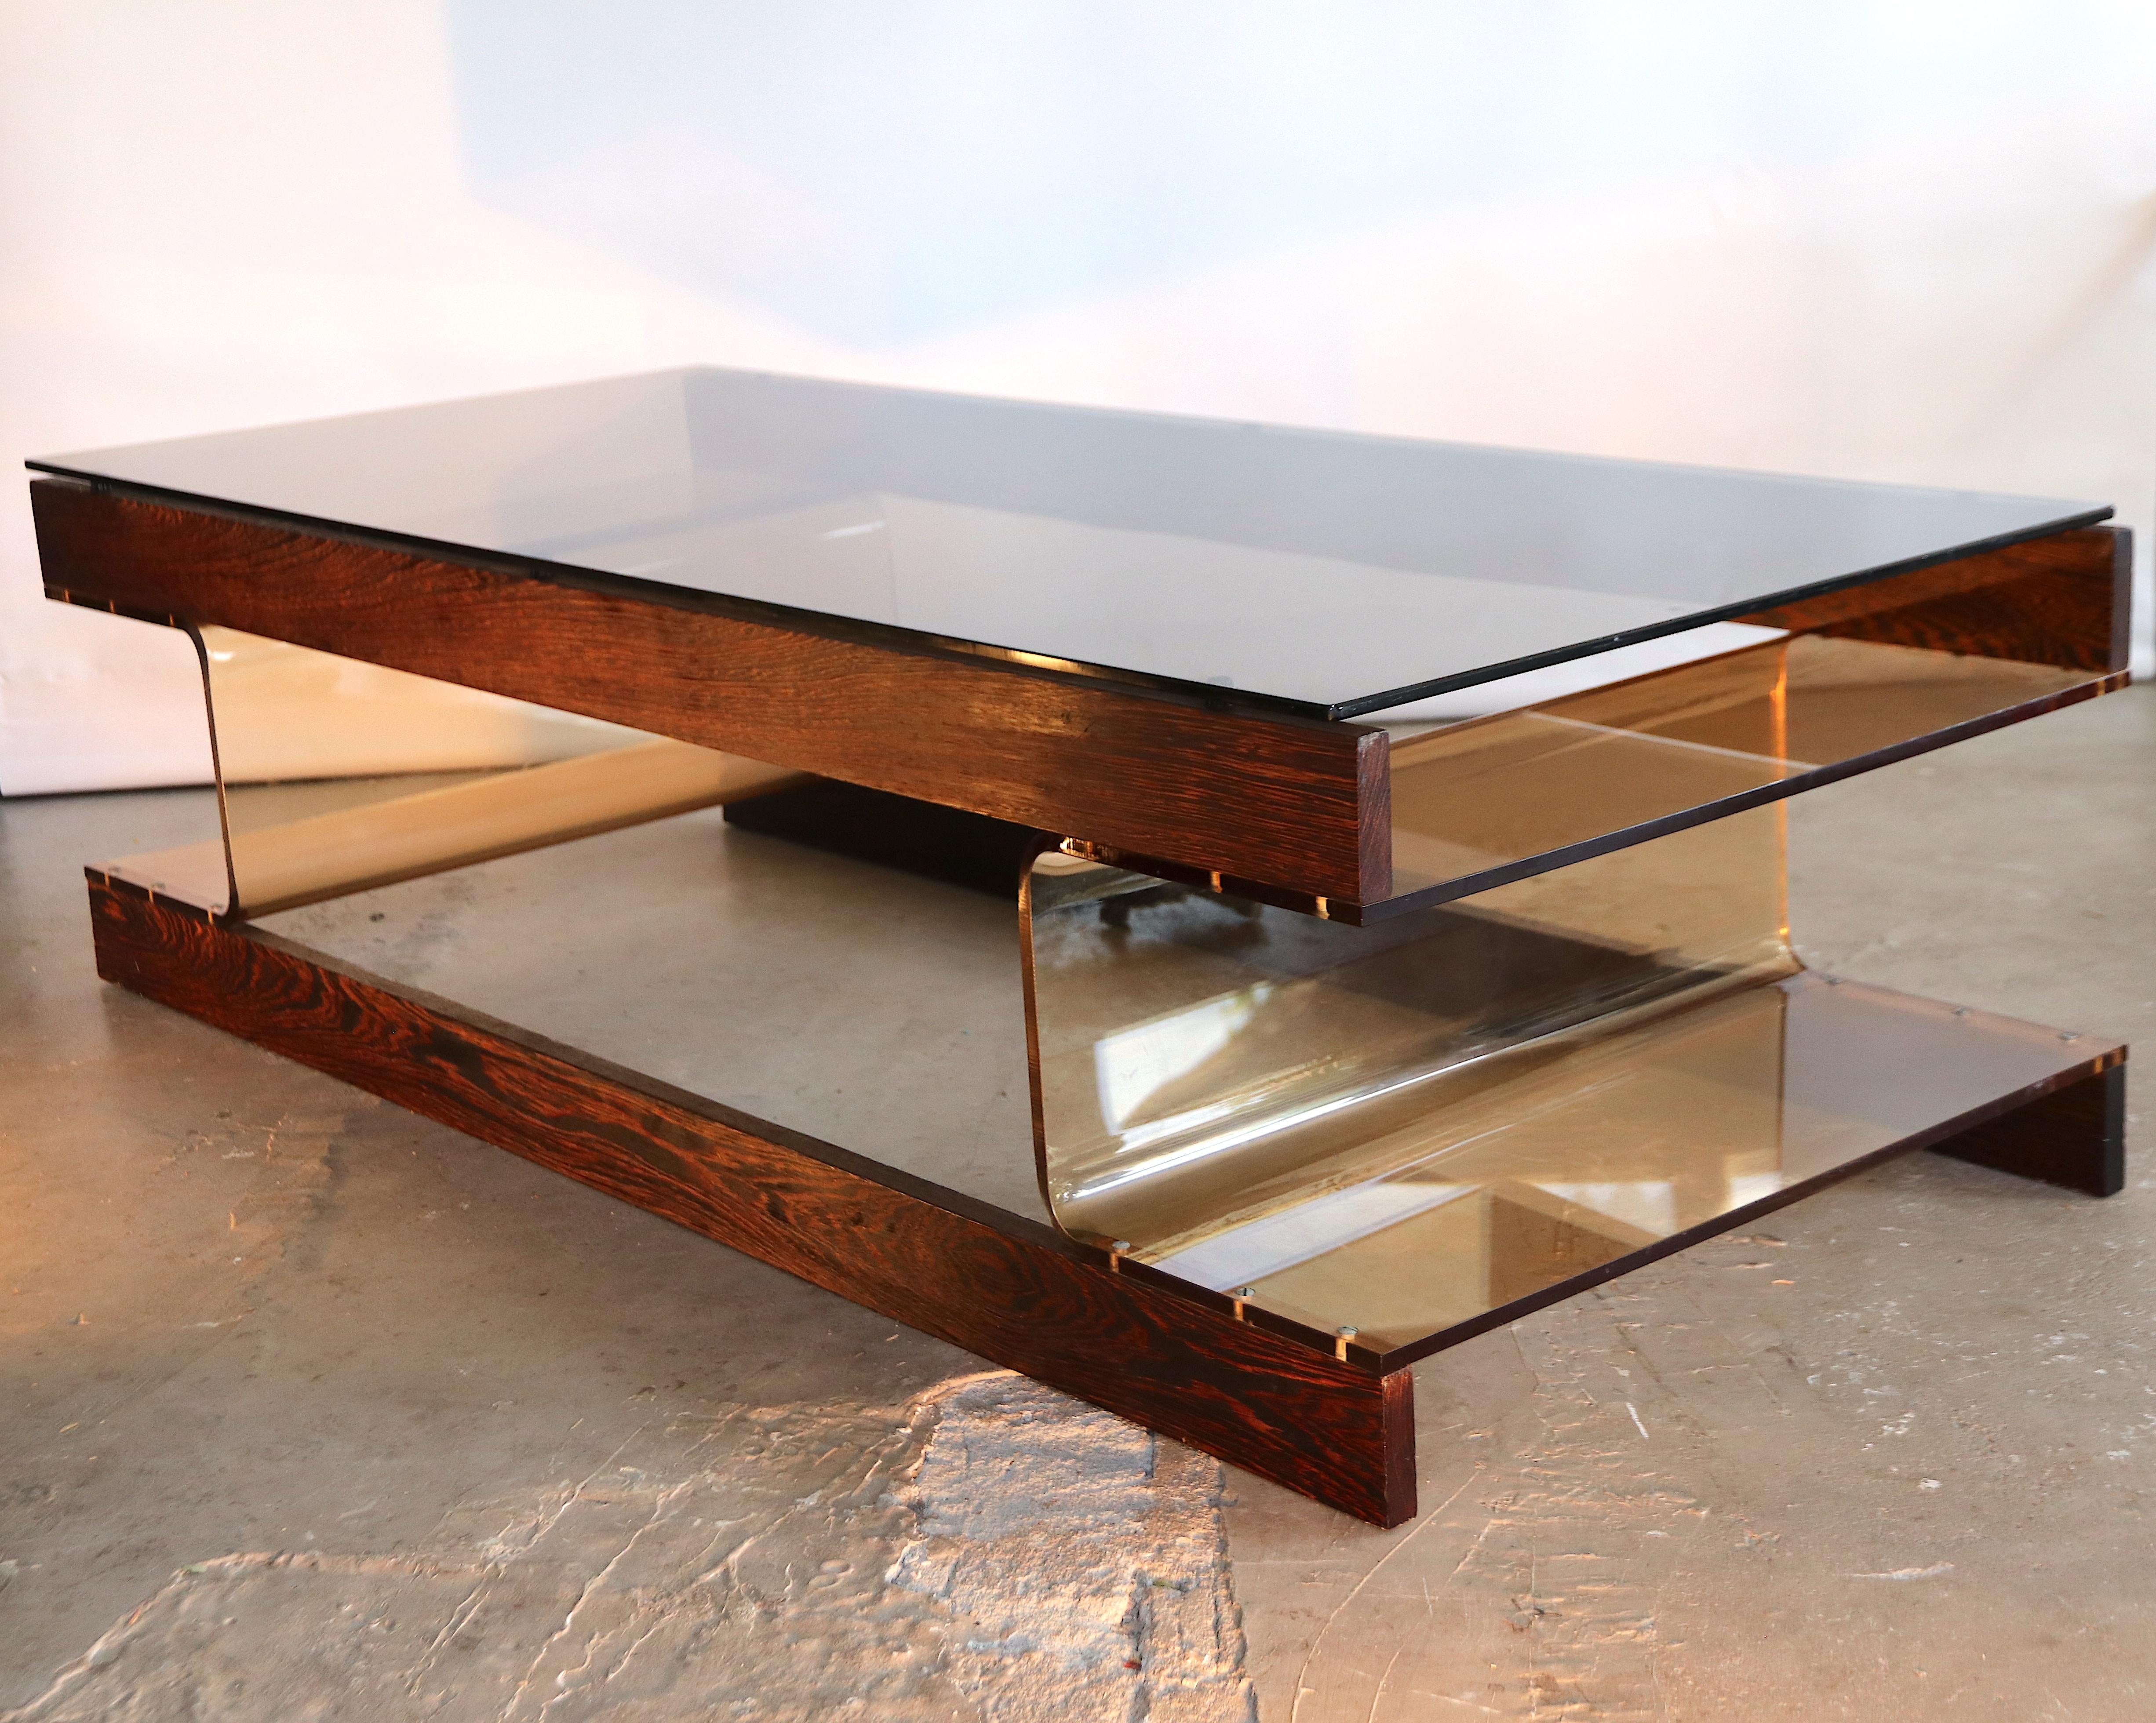 Beautiful Space Age coffee table by Roche Bobois with a tanned perspex base and a bronze smoked glass top. The support of the table can be used as magazine holder as well. This table is from the same line as the other Roche Bobois coffee table